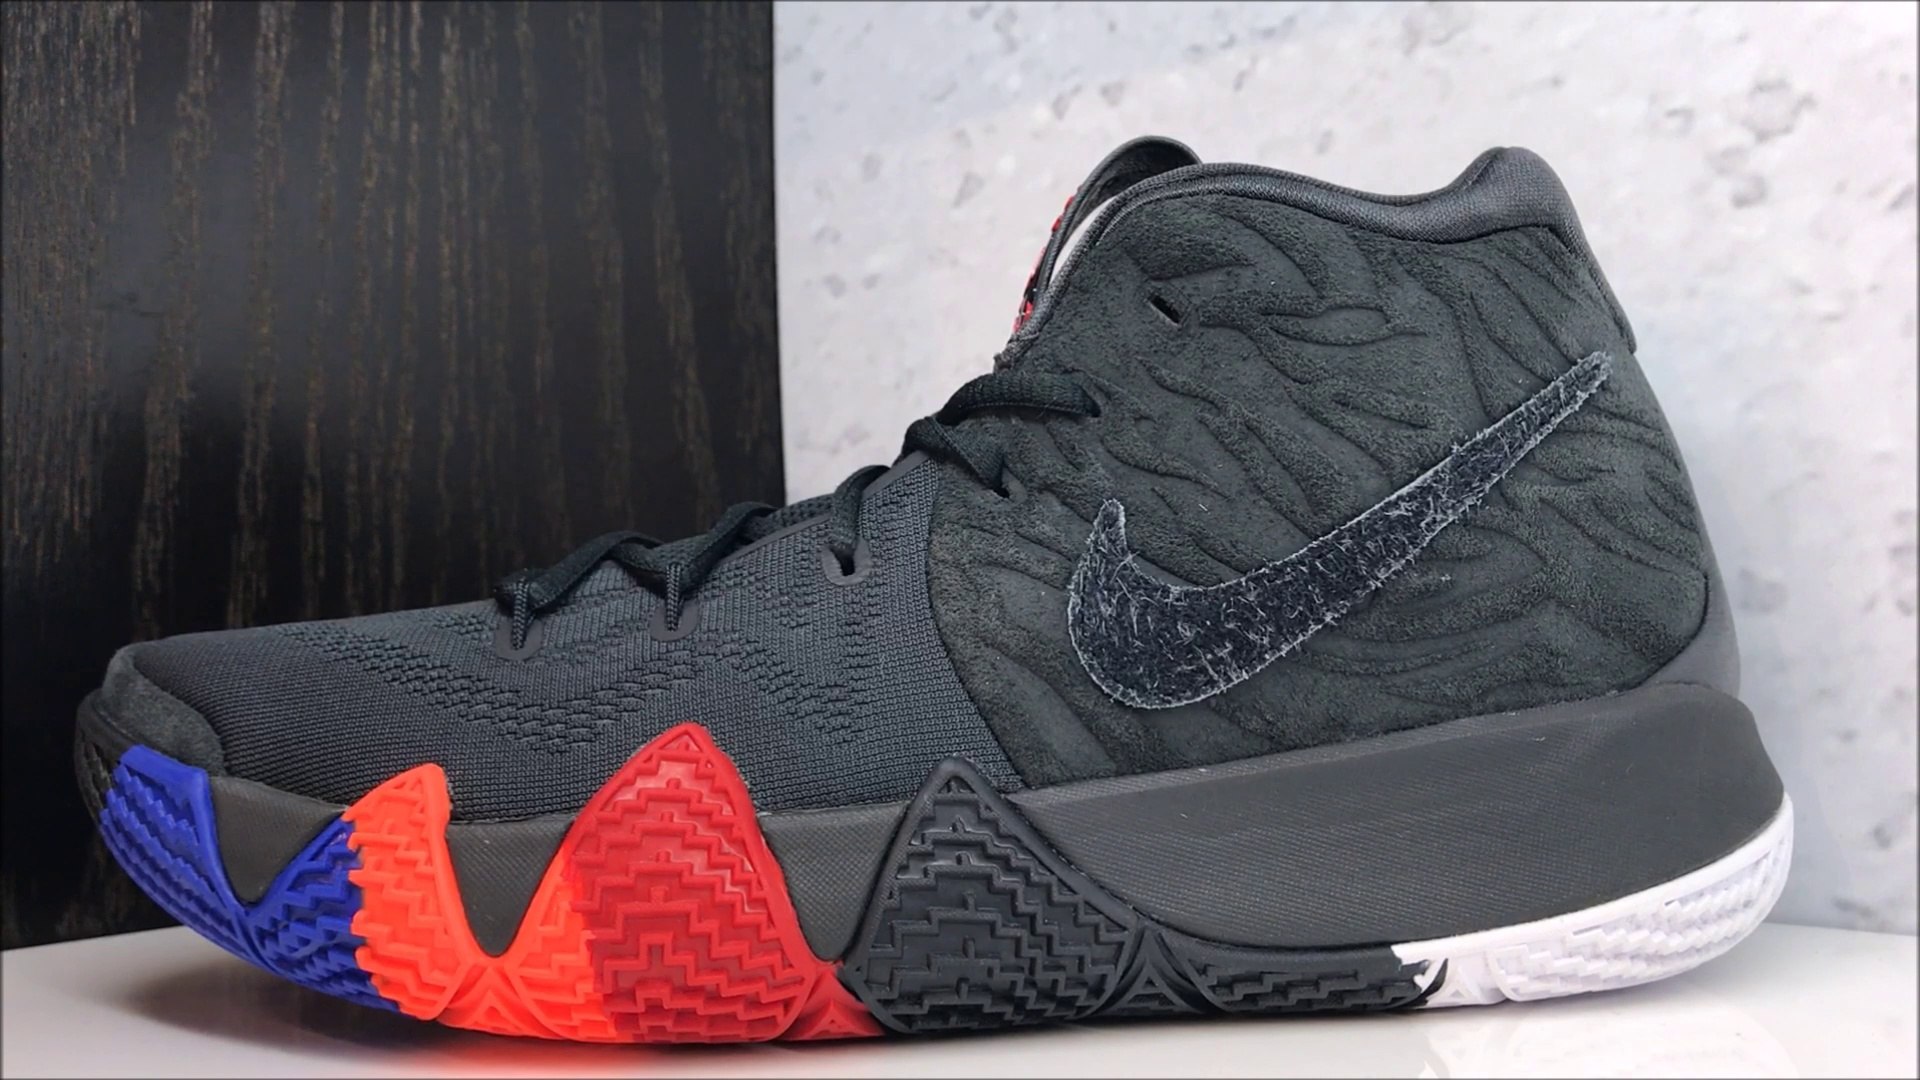 NIKE KYRIE IRVING 4 YEAR OF THE MONKEY SNEAKER REVIEW - video Dailymotion